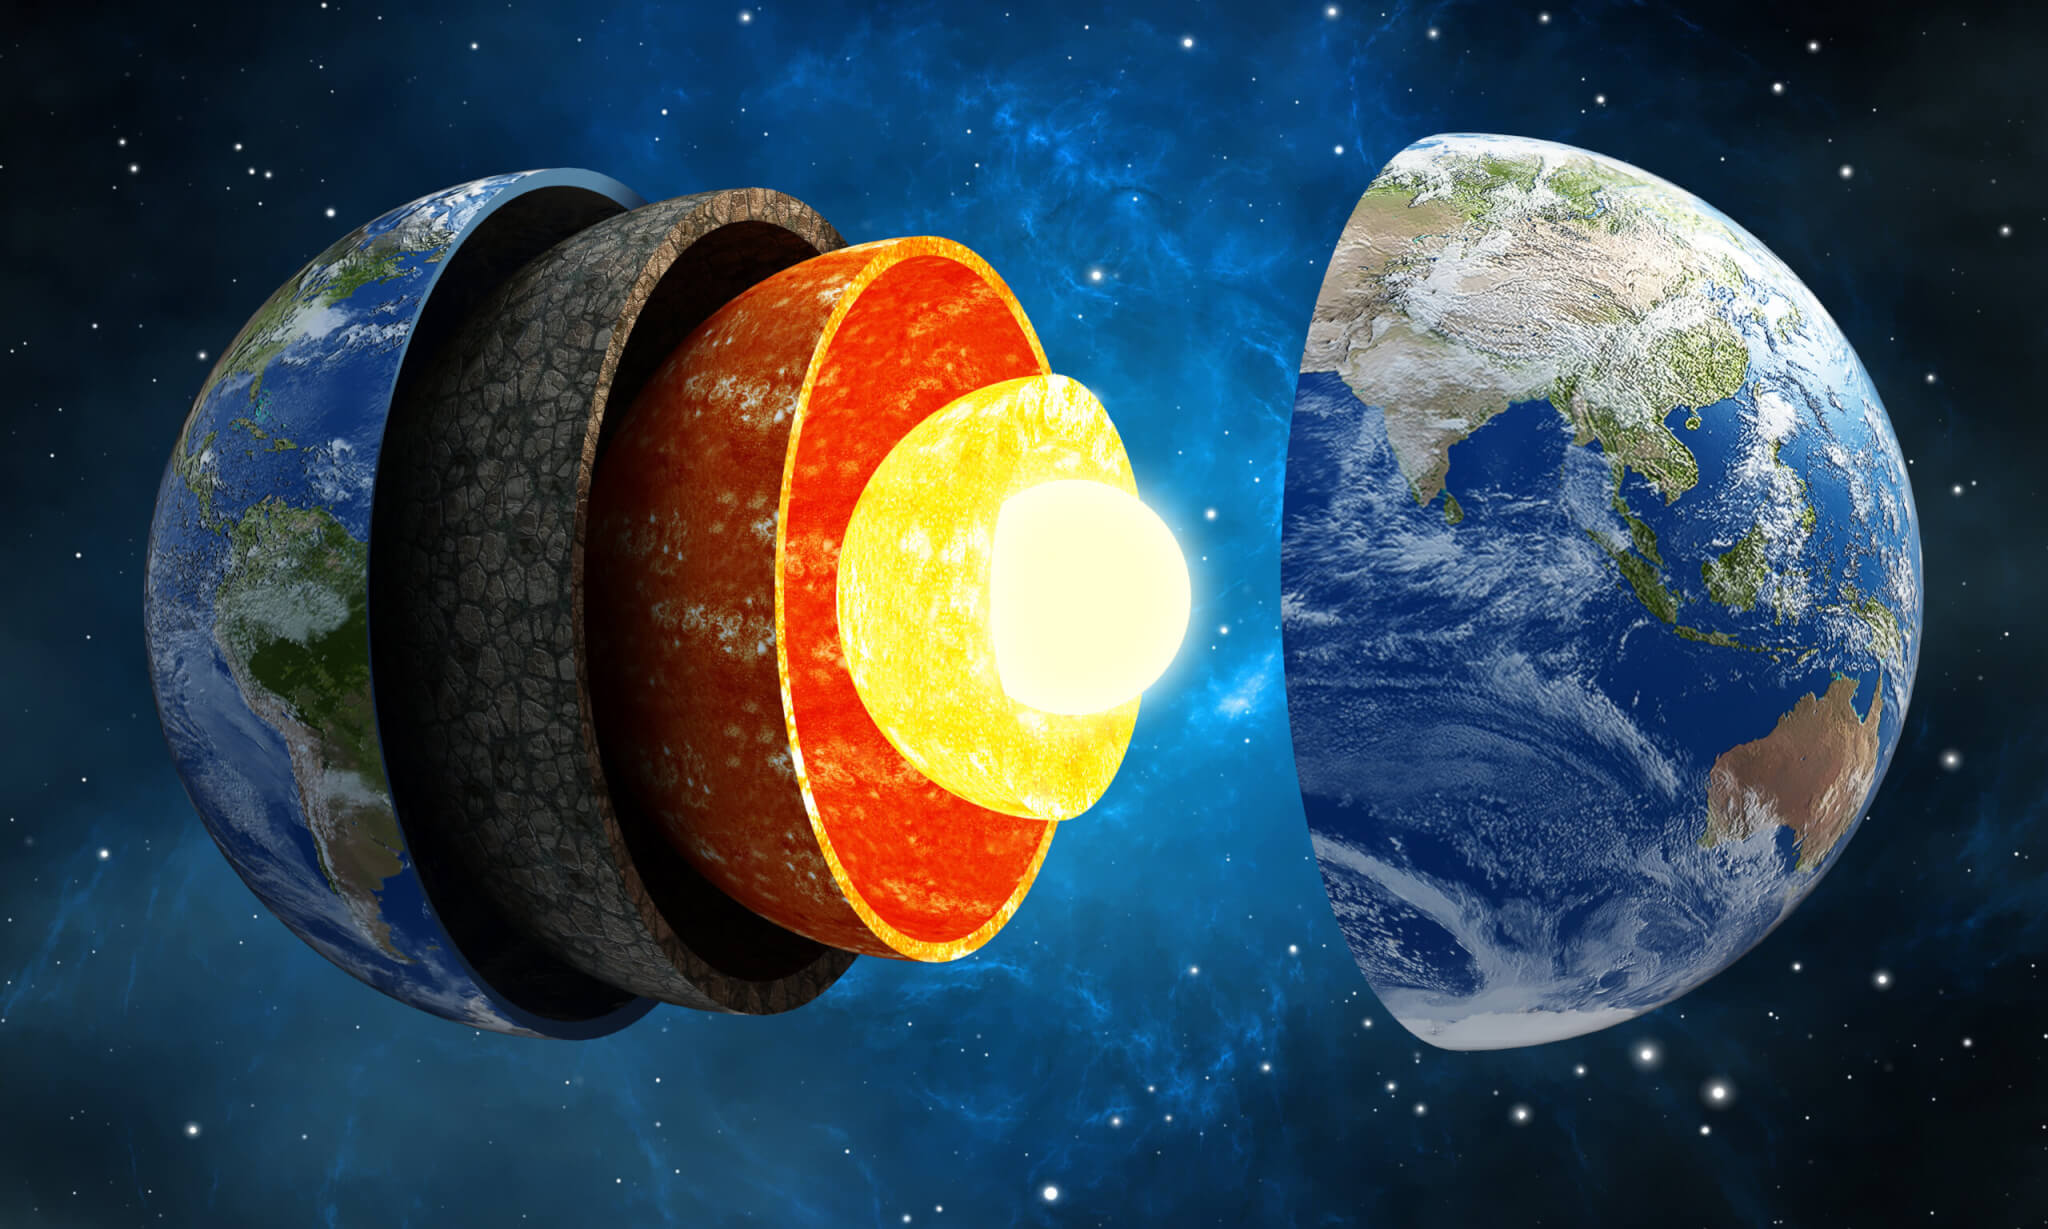 Studying the Earth’s inner core reveals the existence of a ‘planet within a planet’